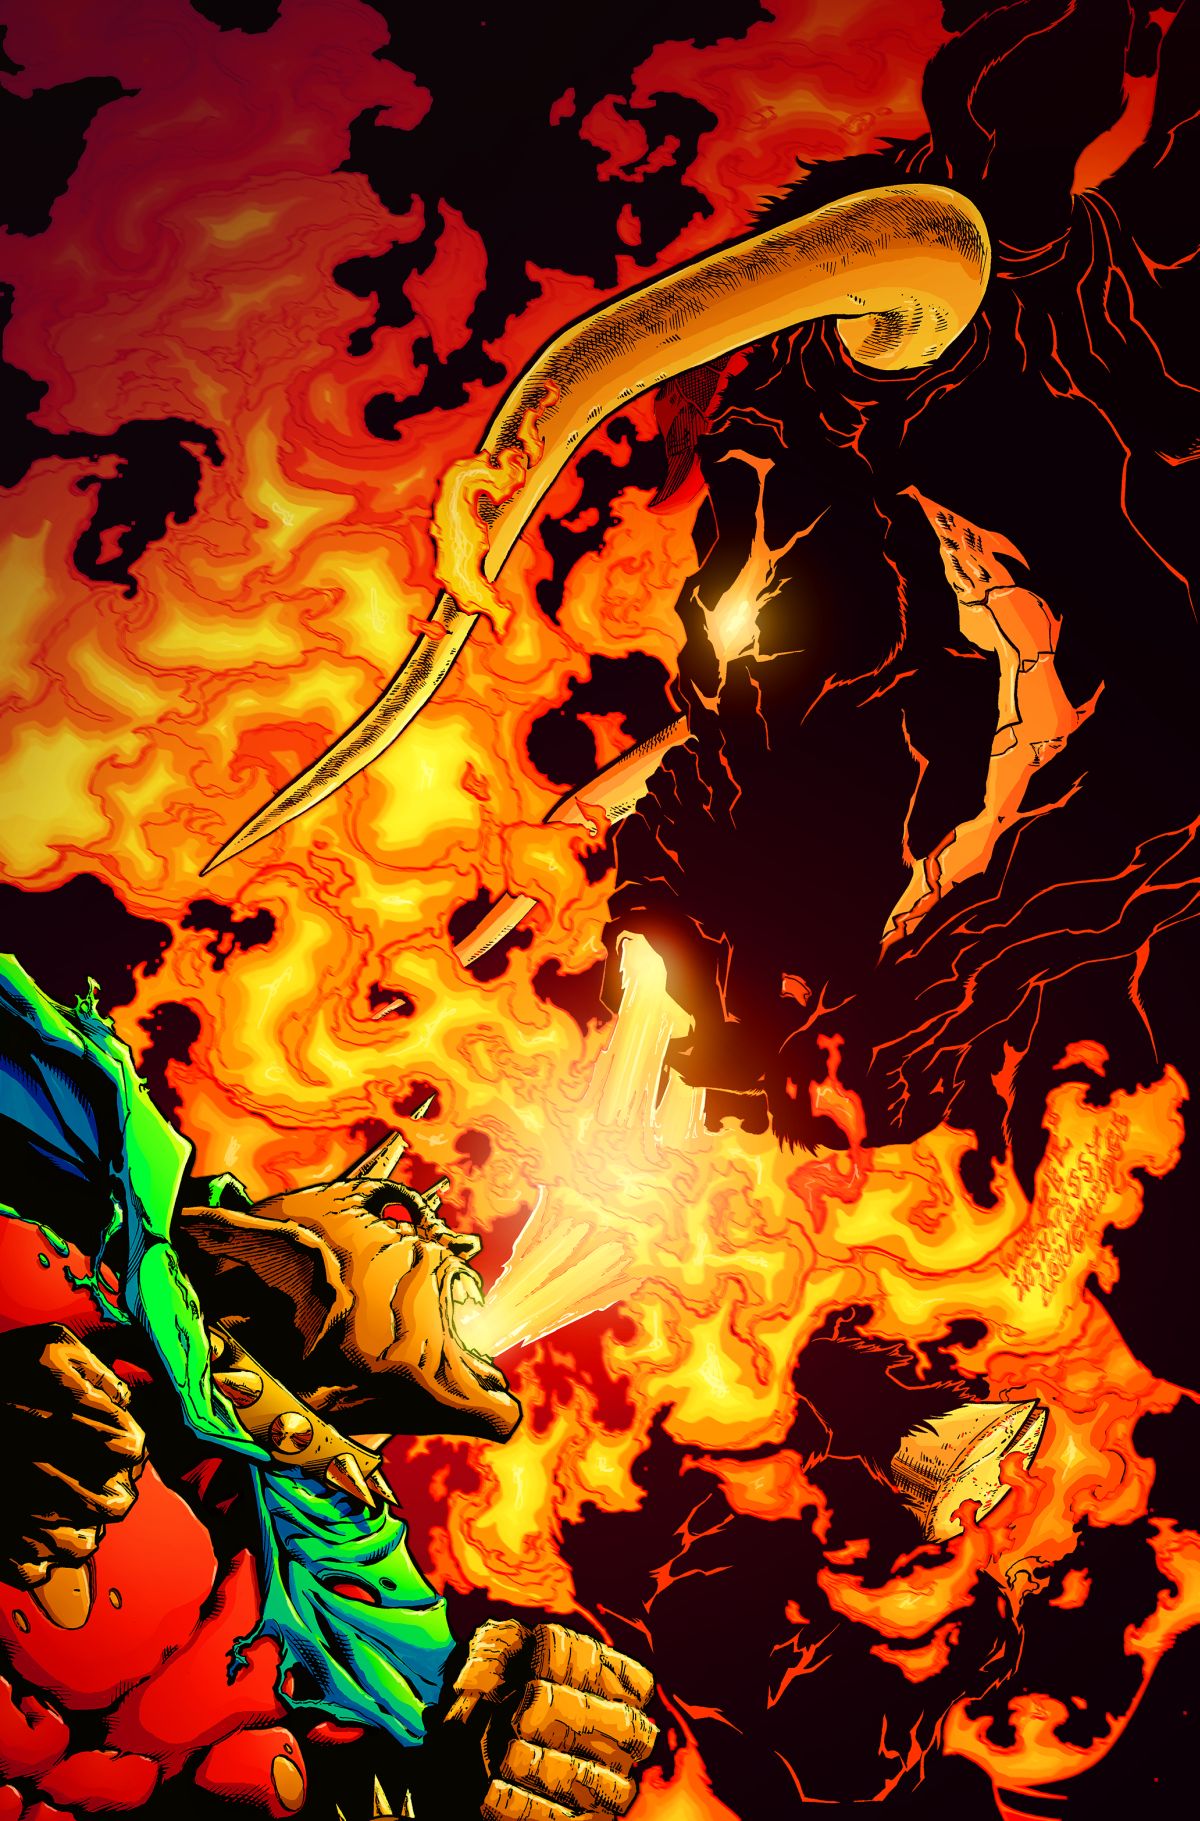 THE DEMON: HELL IS EARTH #2